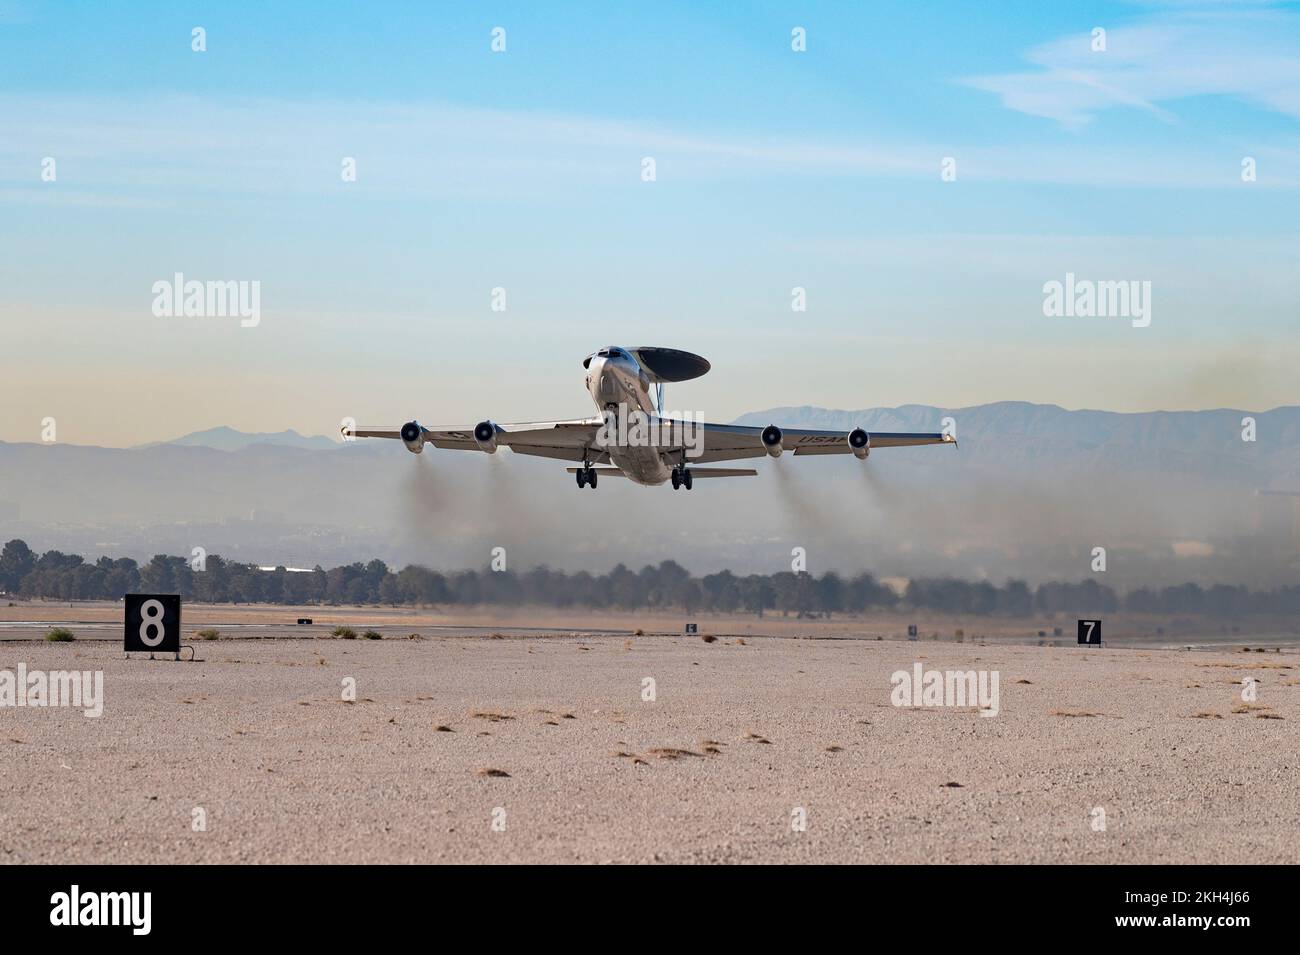 An E-3A Sentry takes off for a U.S. Air Force Weapons School Integration (WSINT) exercise at Nellis Air Force Base, Nevada, Nov. 21, 2022. The E-3 is at Nellis AFB participating in  WSINT and provides an accurate, real-time picture of the battlespace to the Joint Air Operations Center. (U.S. Air Force photo by William R. Lewis) Stock Photo